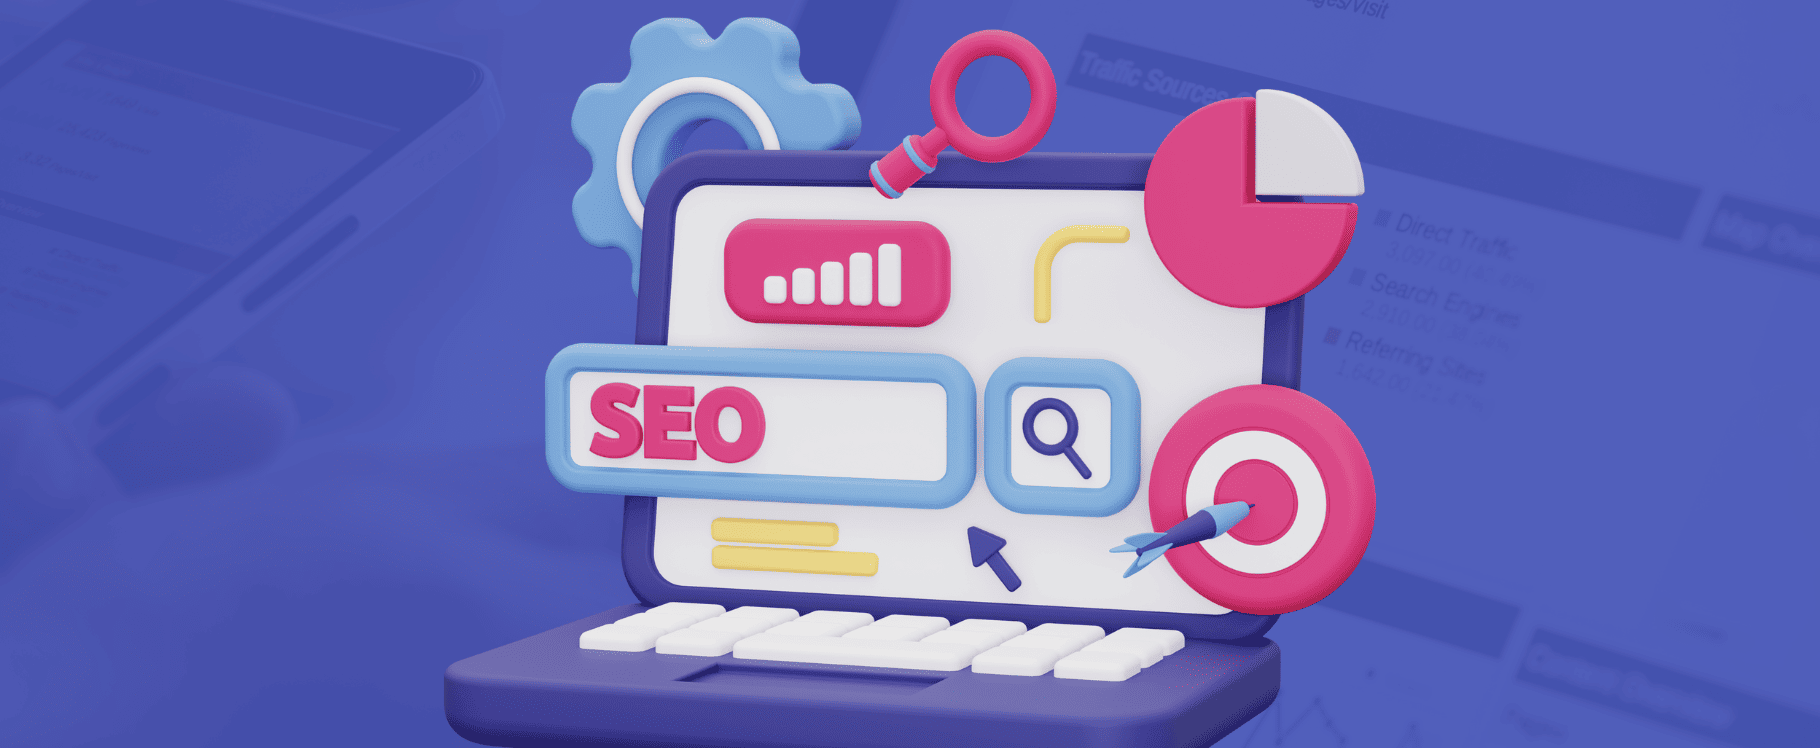 on-page seo best practices